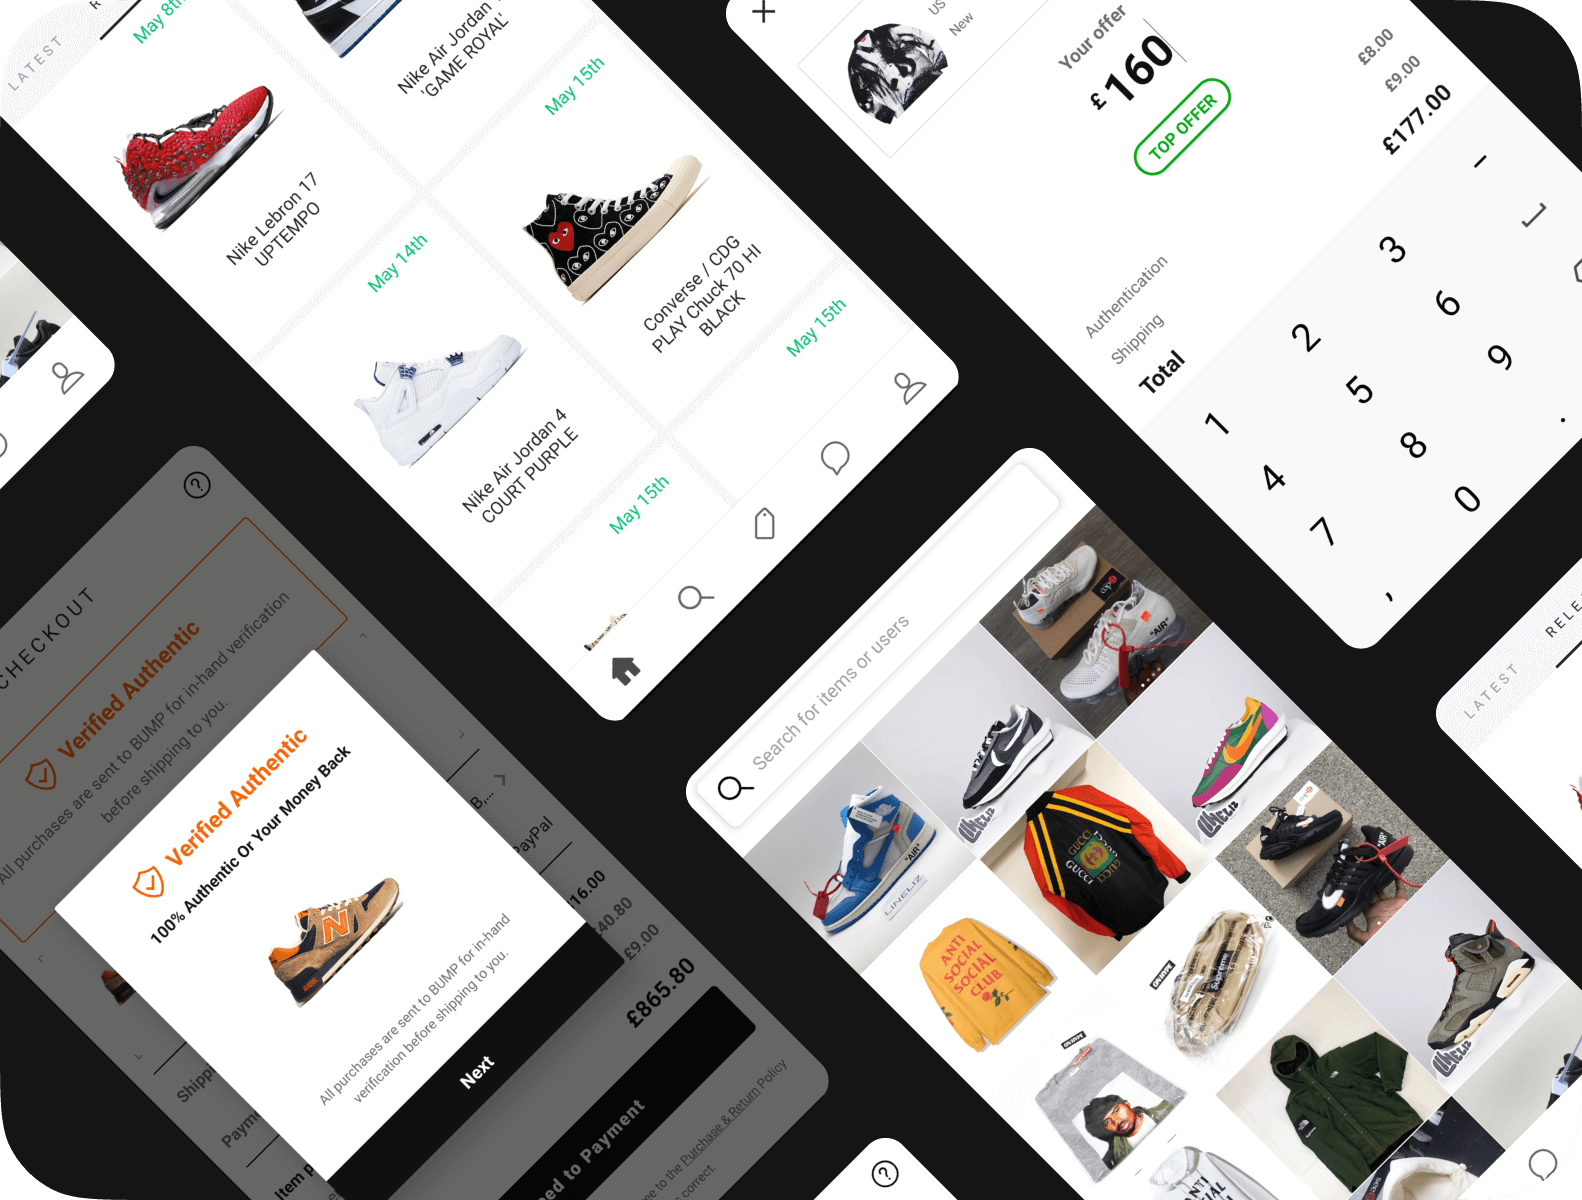 Multiple screenshots, arranged diagonally of the Bump app showing sneakers for sale and the checkout process.